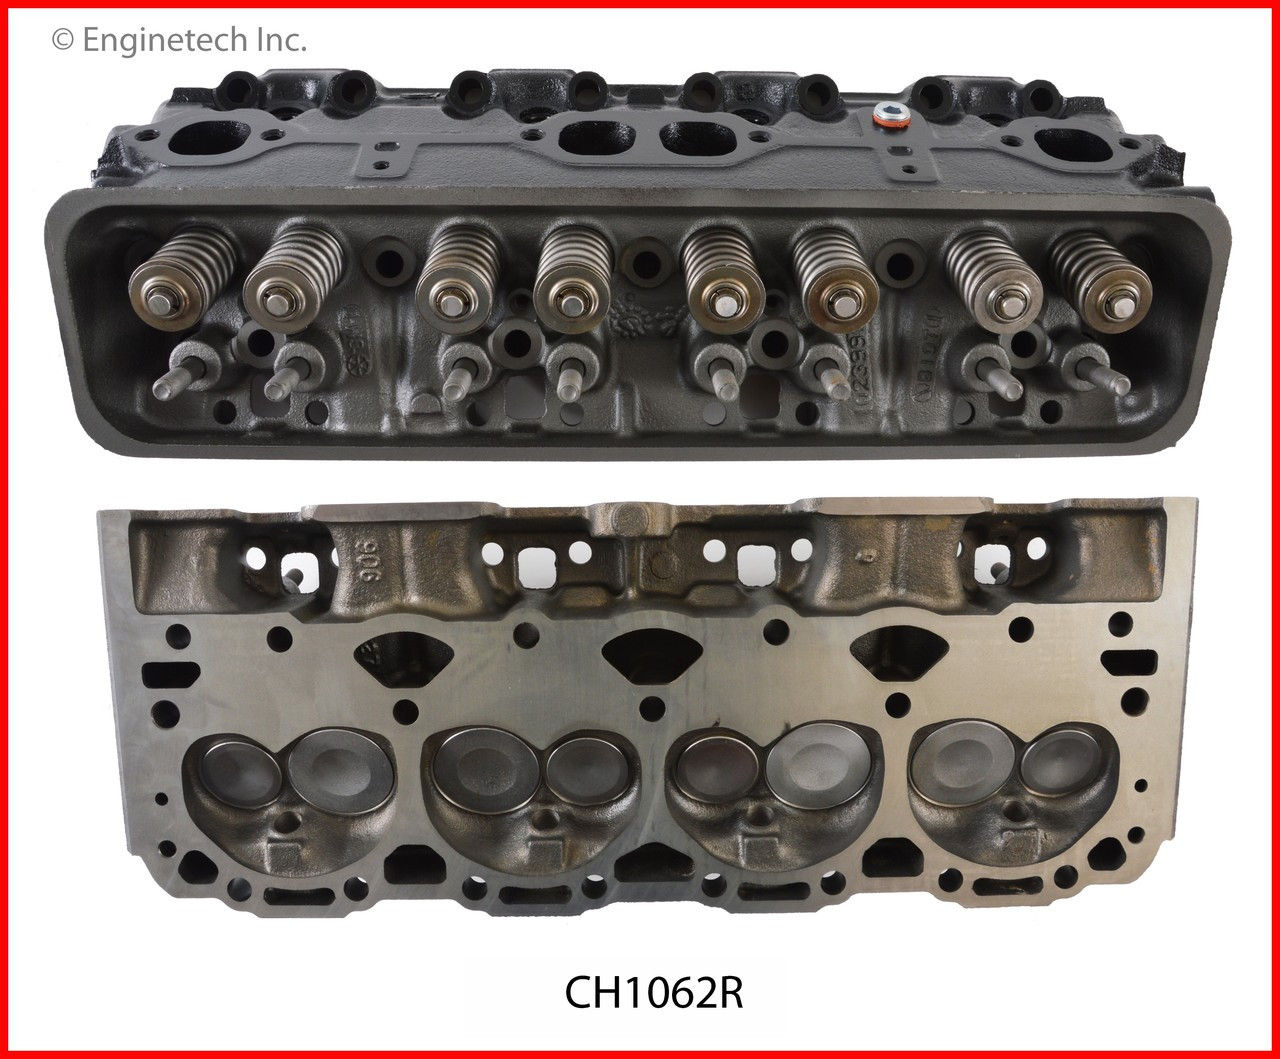 Cylinder Head Assembly - 1997 Chevrolet P30 5.7L (CH1062R.E50)